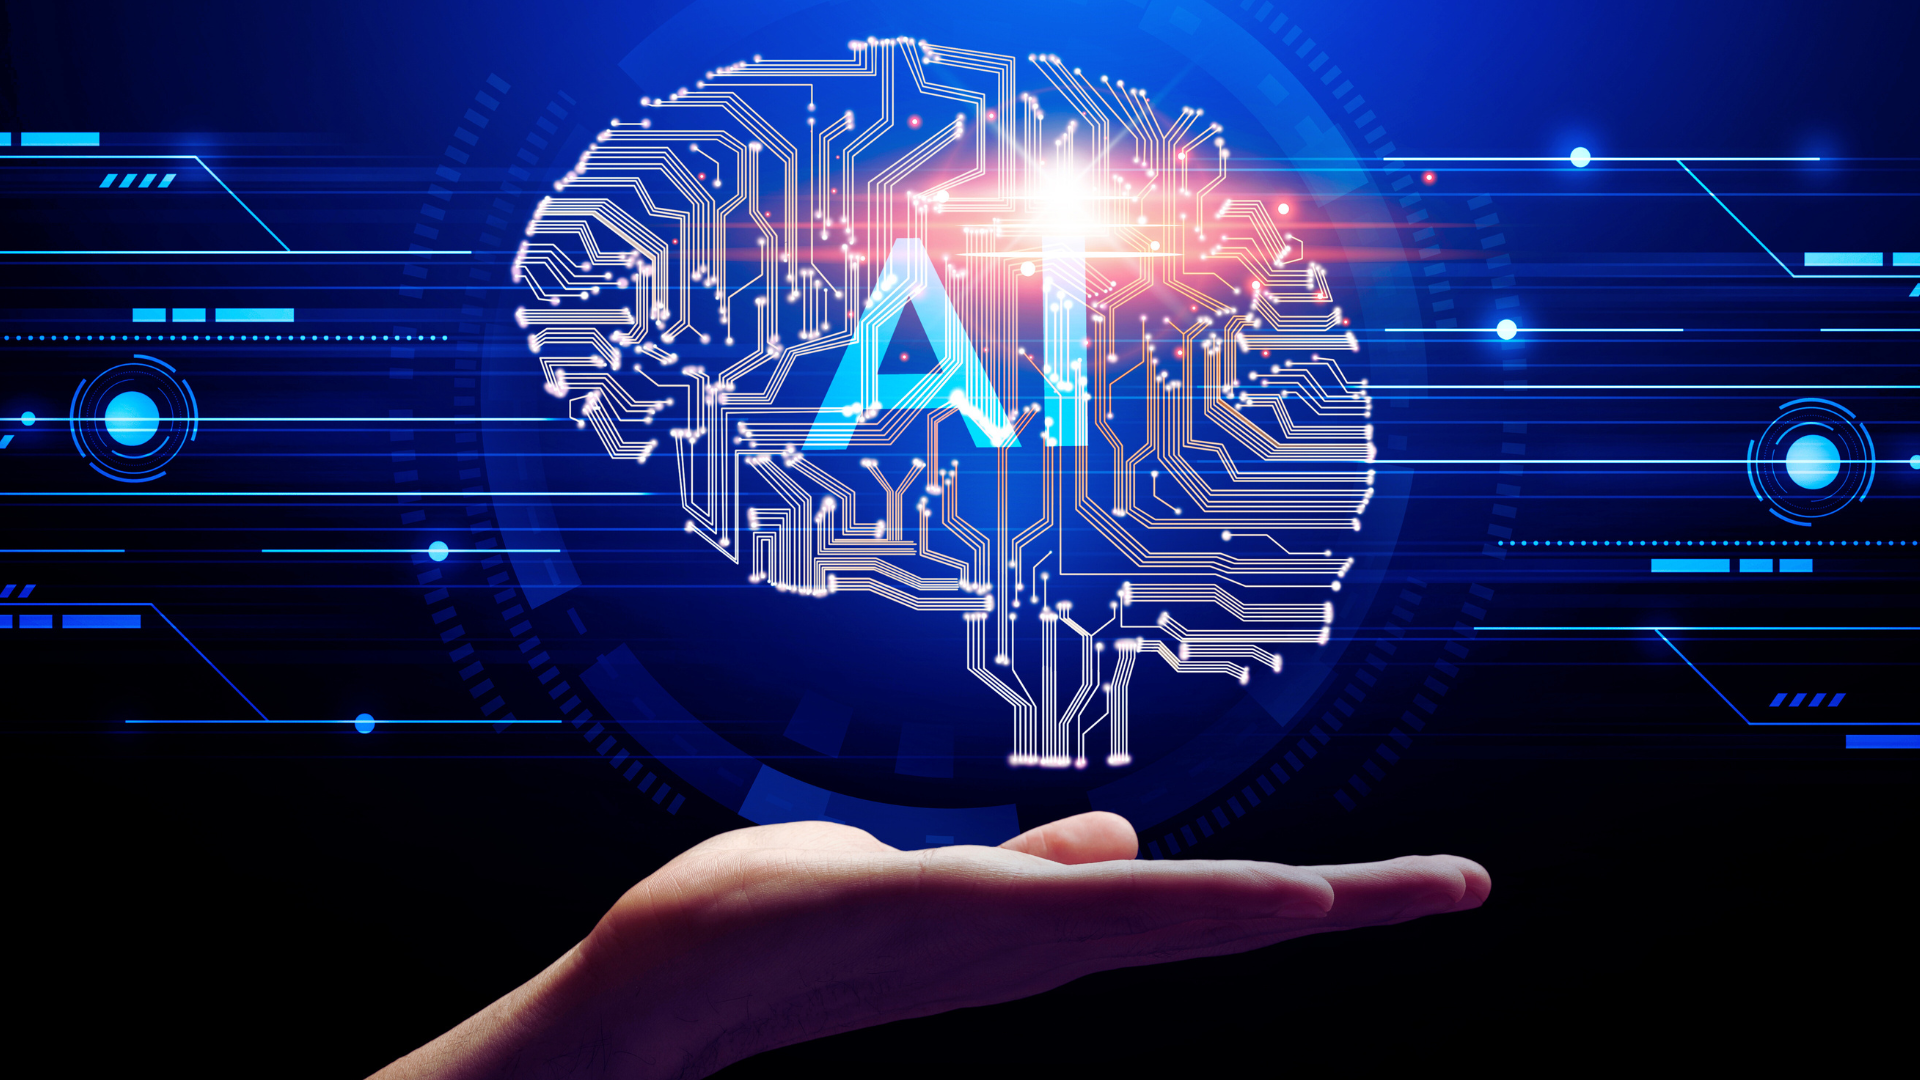 AI in Personalized Marketing: Is It A Match Made in Heaven?